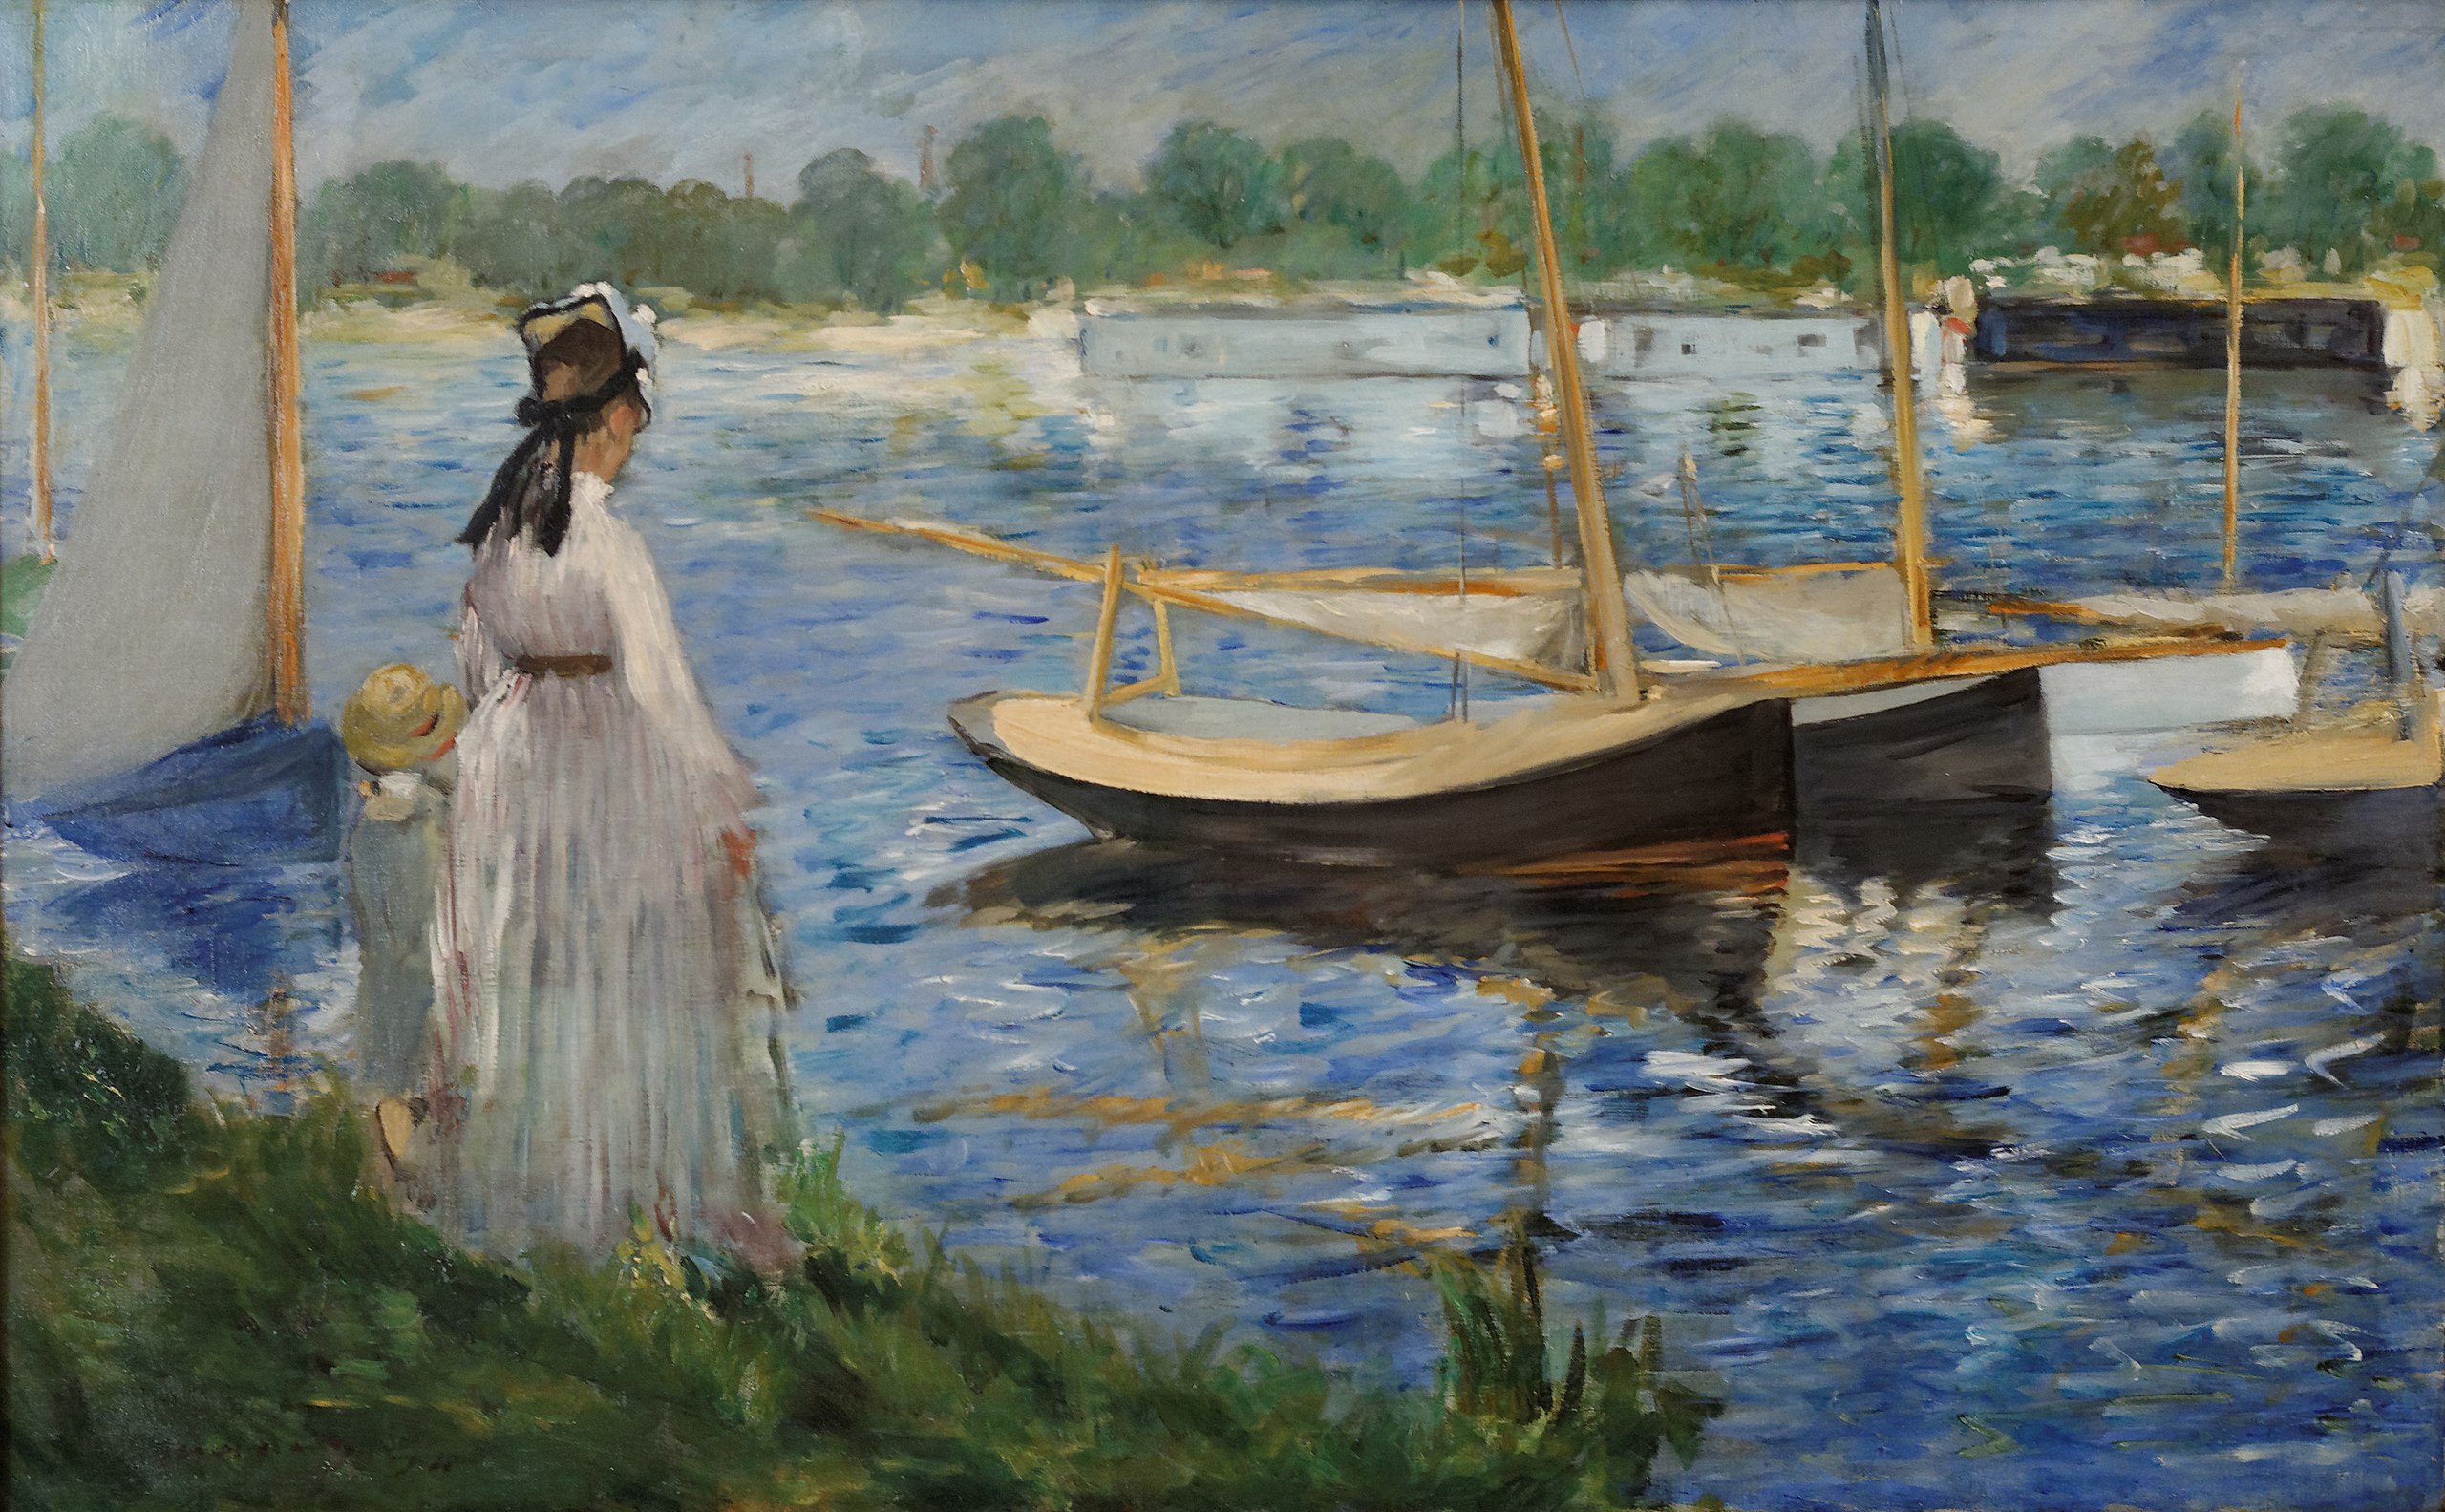 Banks of the Seine at Argenteuil by Édouard Manet - 1874 - 62.3 x 87 cm The Courtauld Gallery